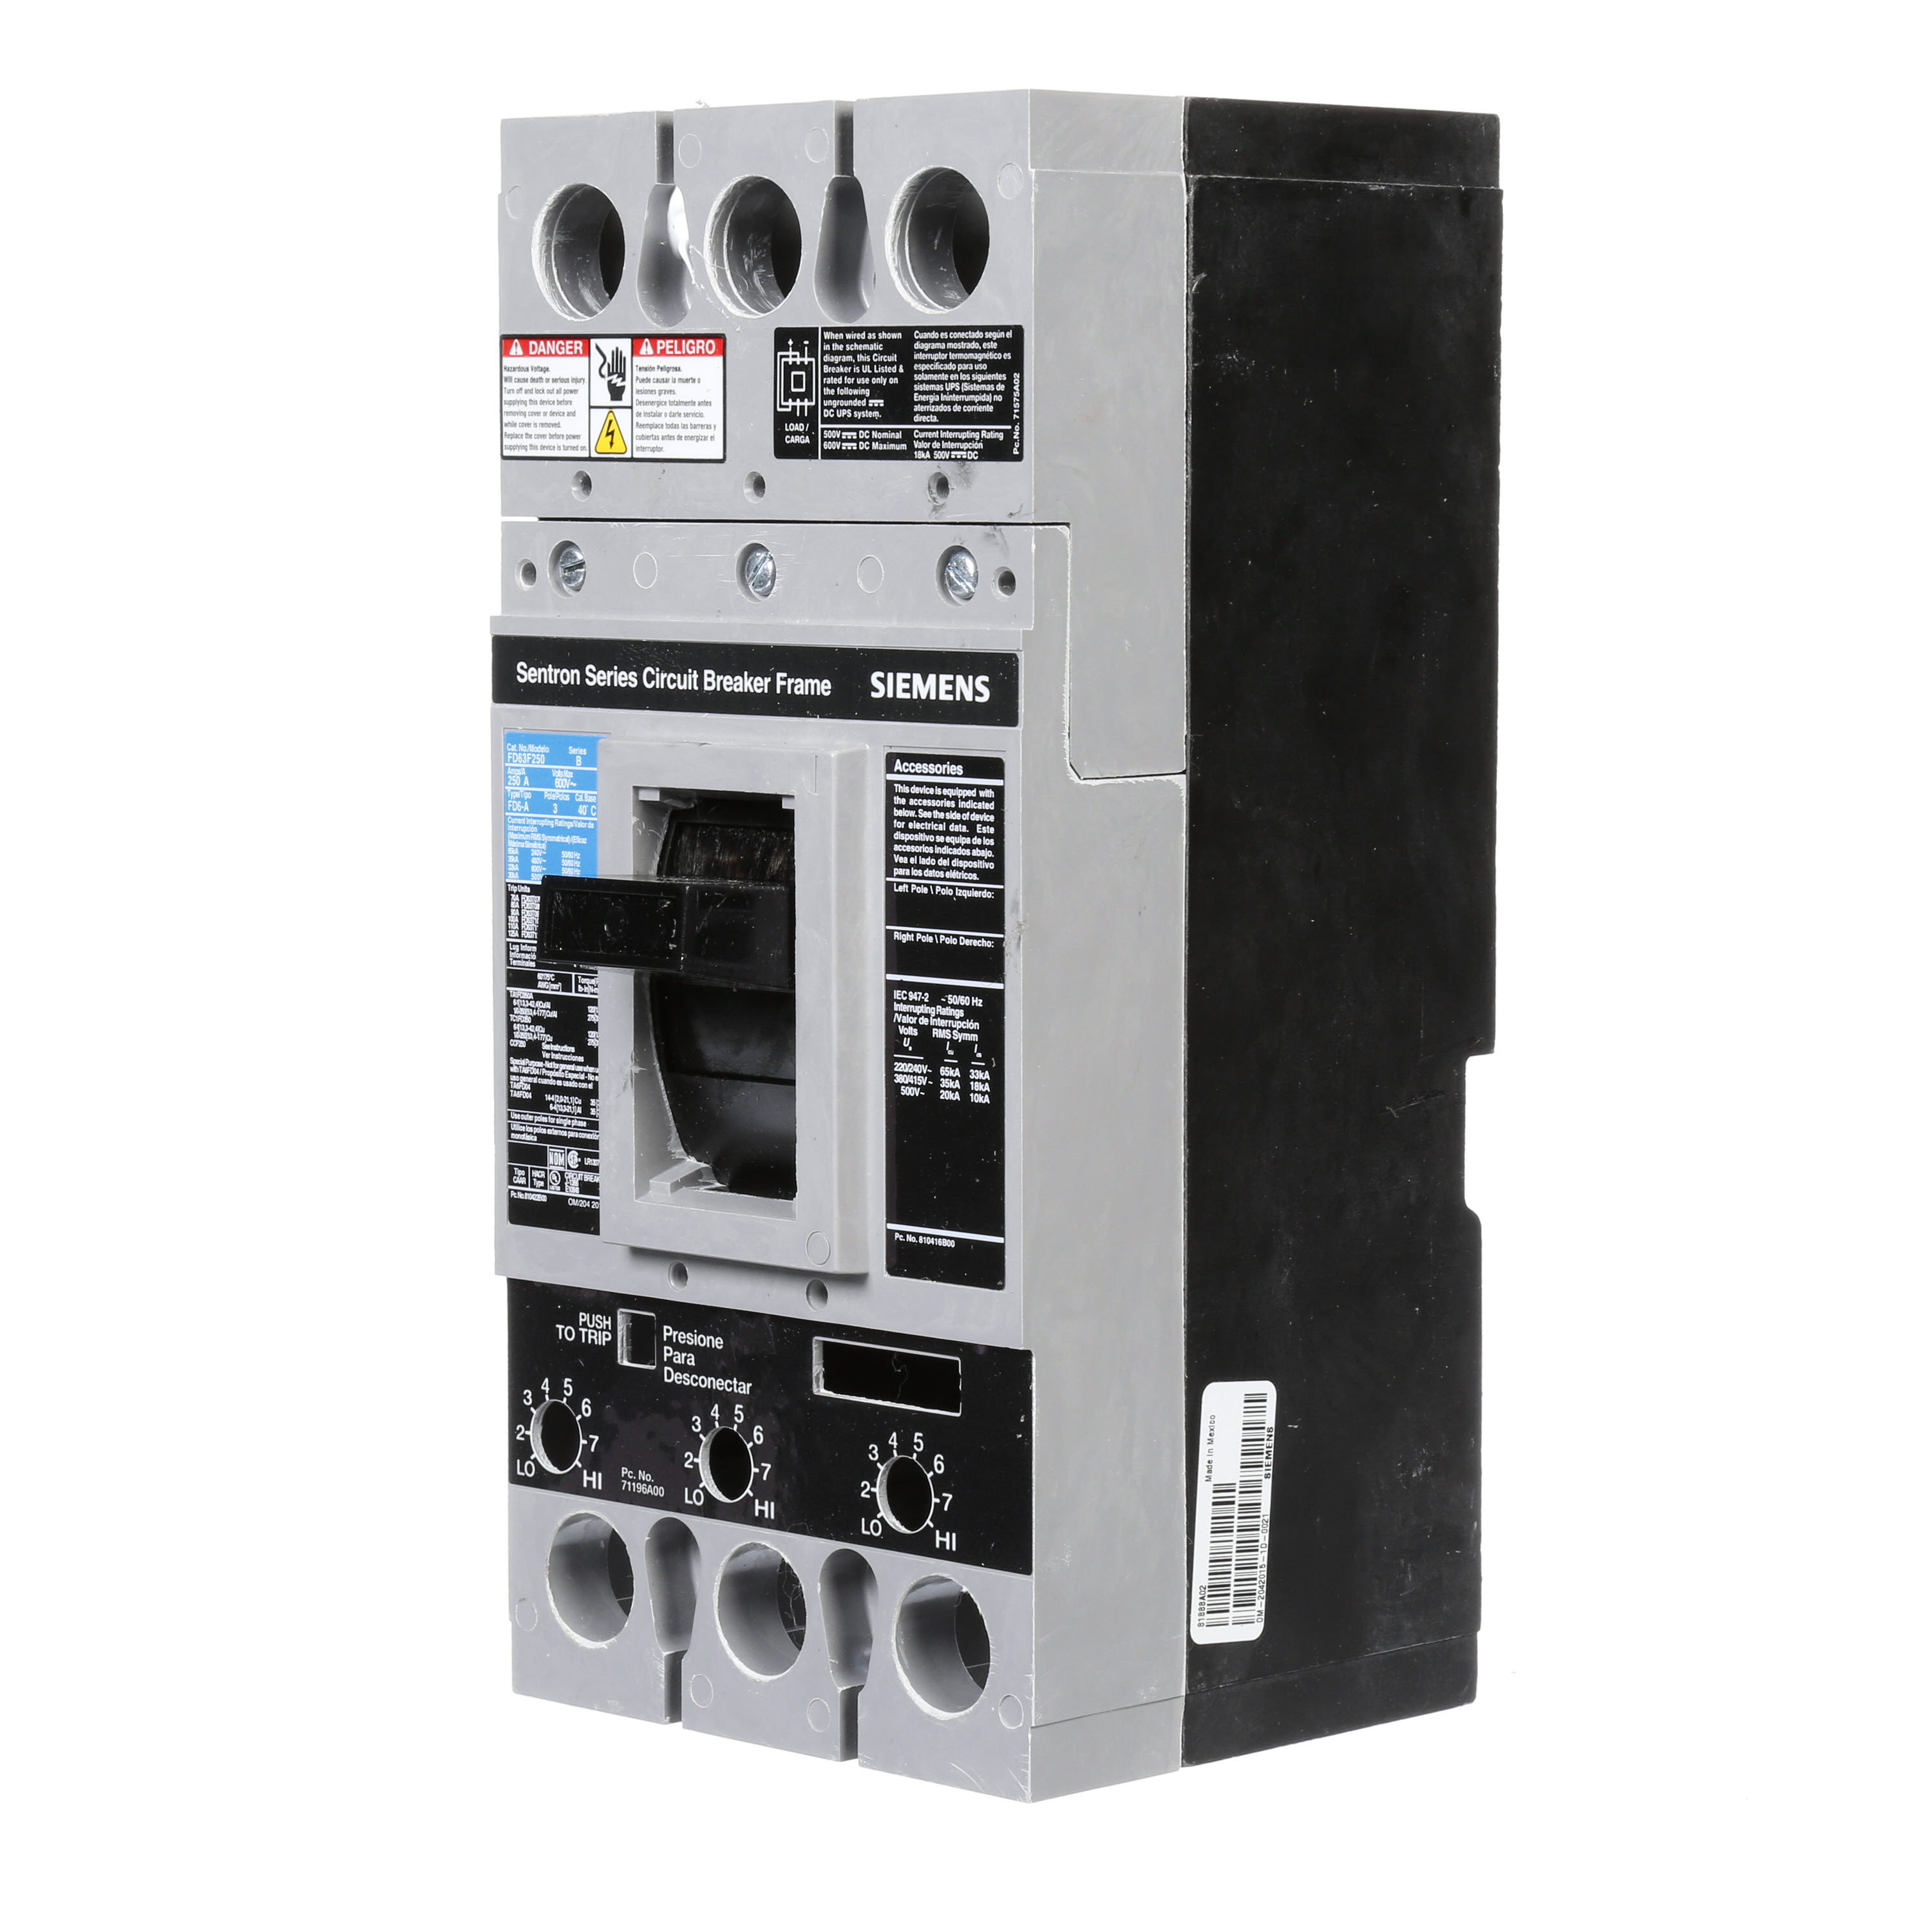 SIEMENS LOW VOLTAGE SENTRON MOLDED CASE CIRCUIT BREAKER. 250A FD FRAME FOR STANDARD BREAKING CAPACITY 3-POLE 600V BREAKERS.